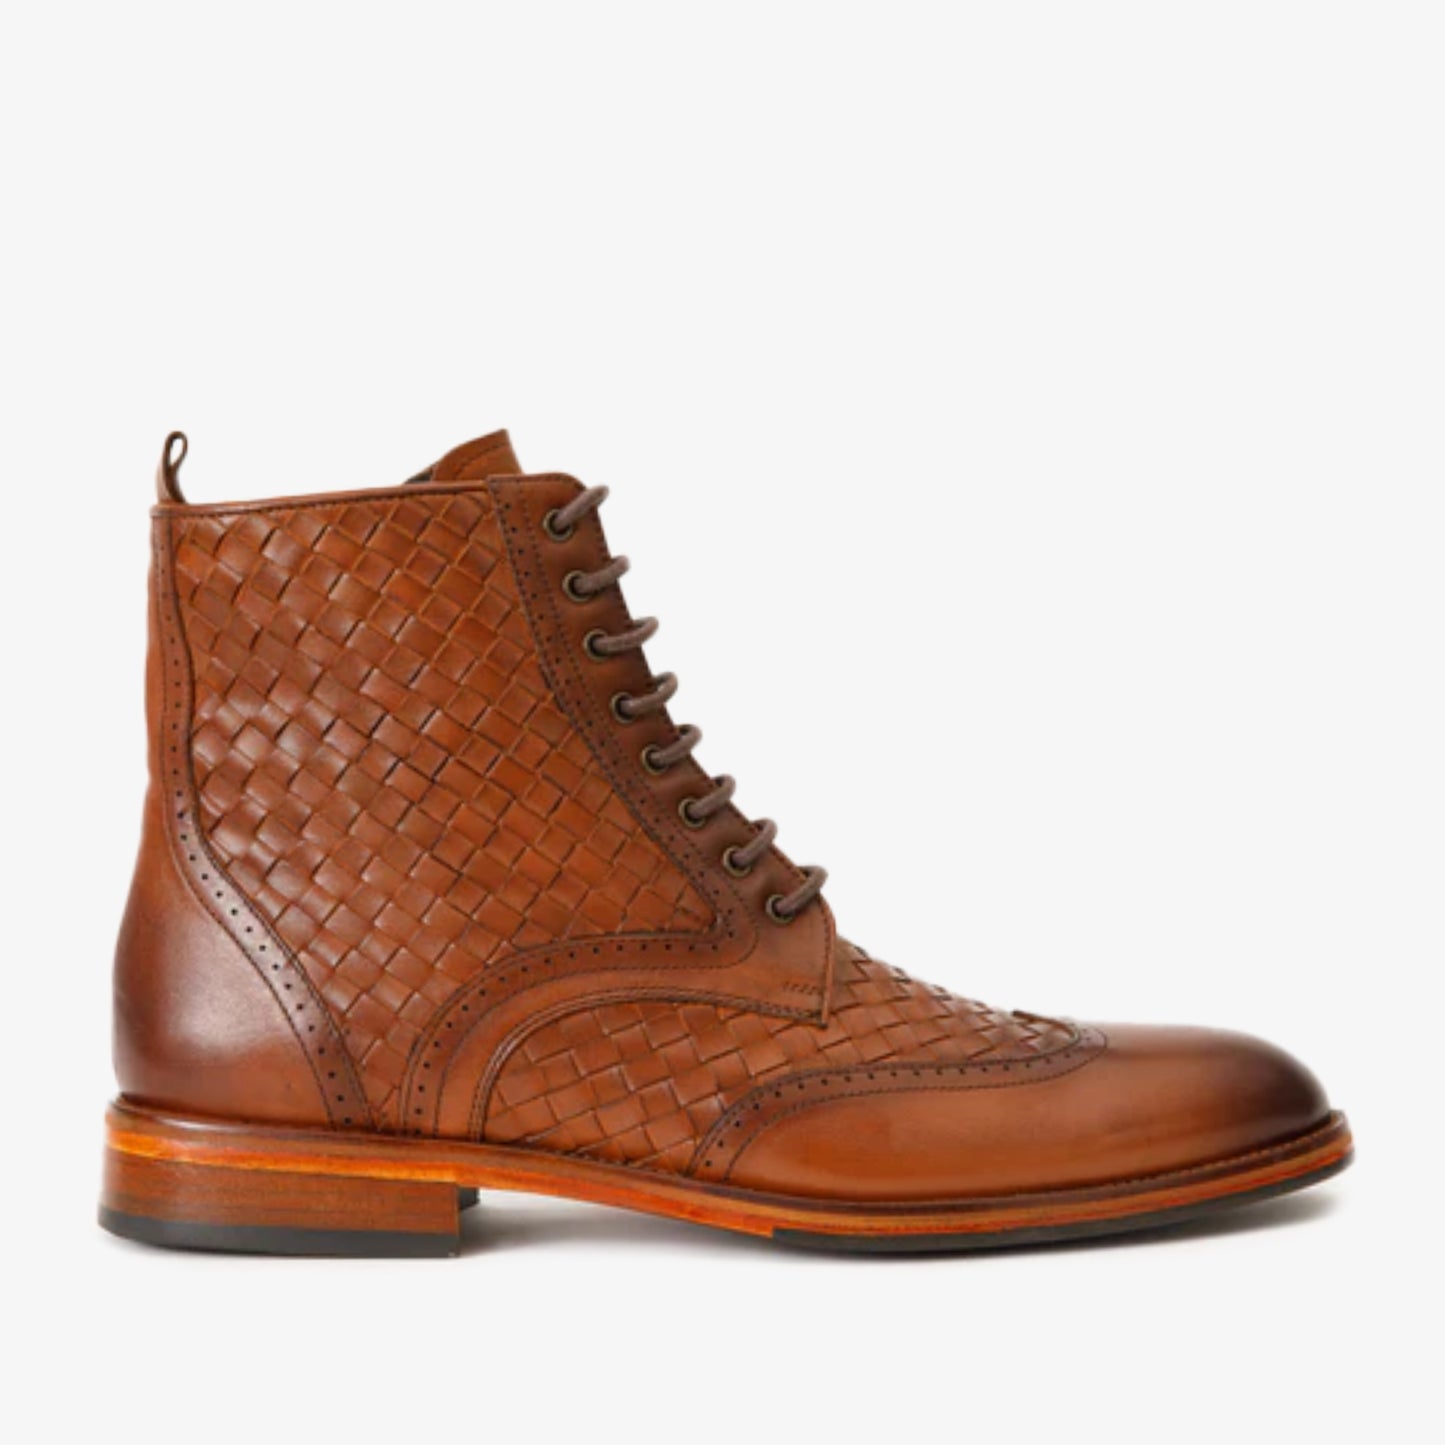 The Loddon Tan Leather Wingtip Brogue Handwoven Lace-Up Men Boot with a Zipper